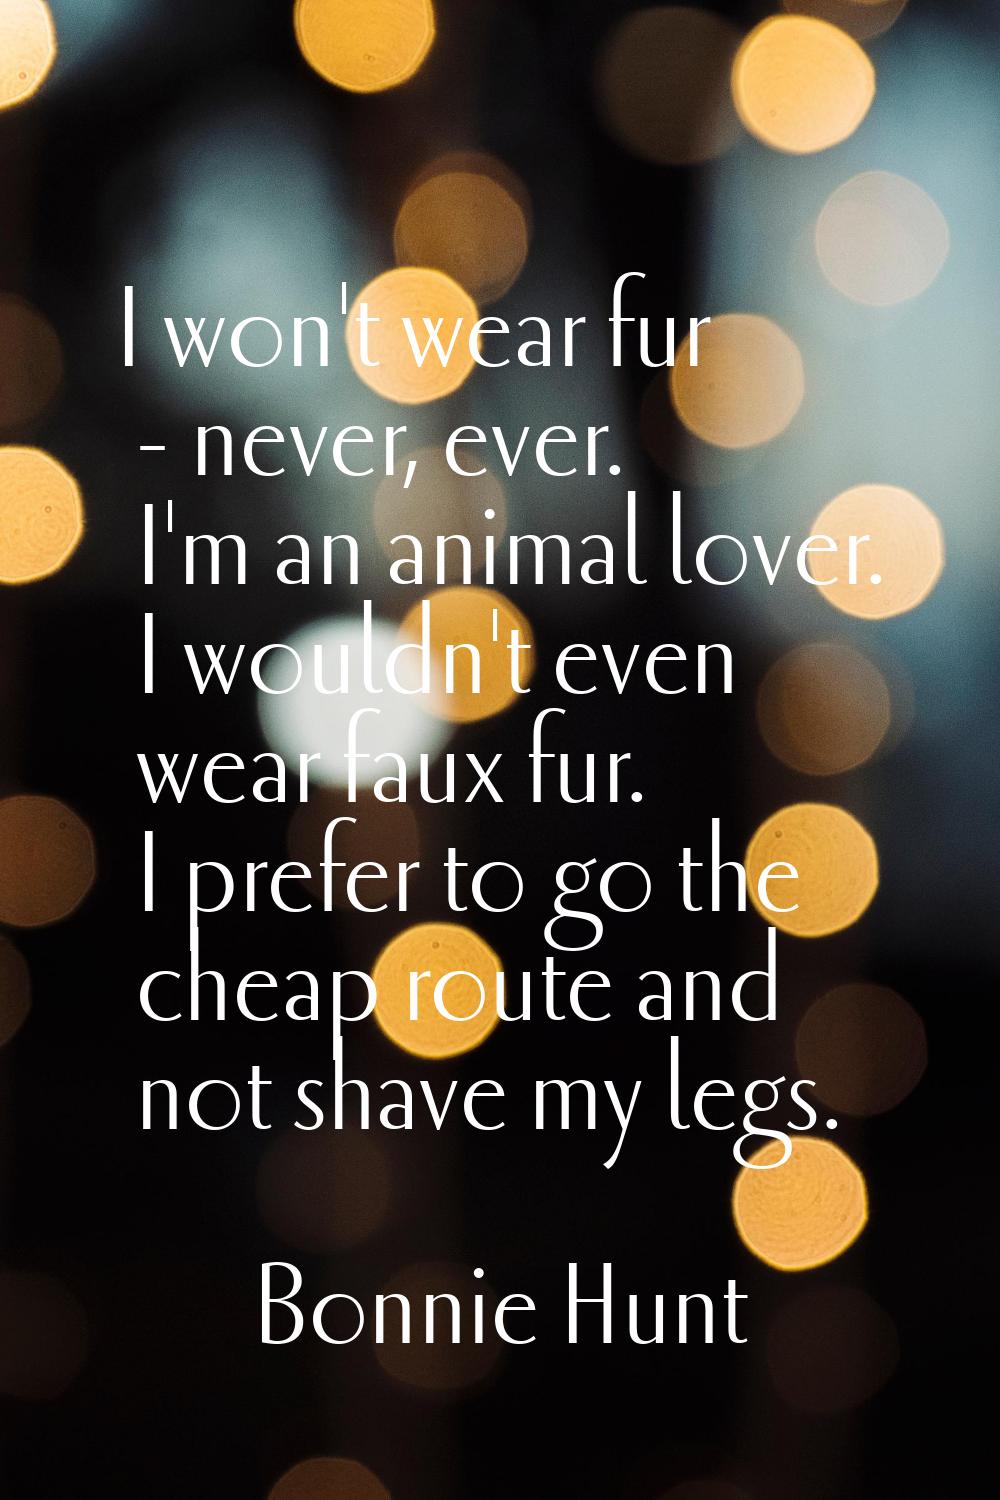 I won't wear fur - never, ever. I'm an animal lover. I wouldn't even wear faux fur. I prefer to go 